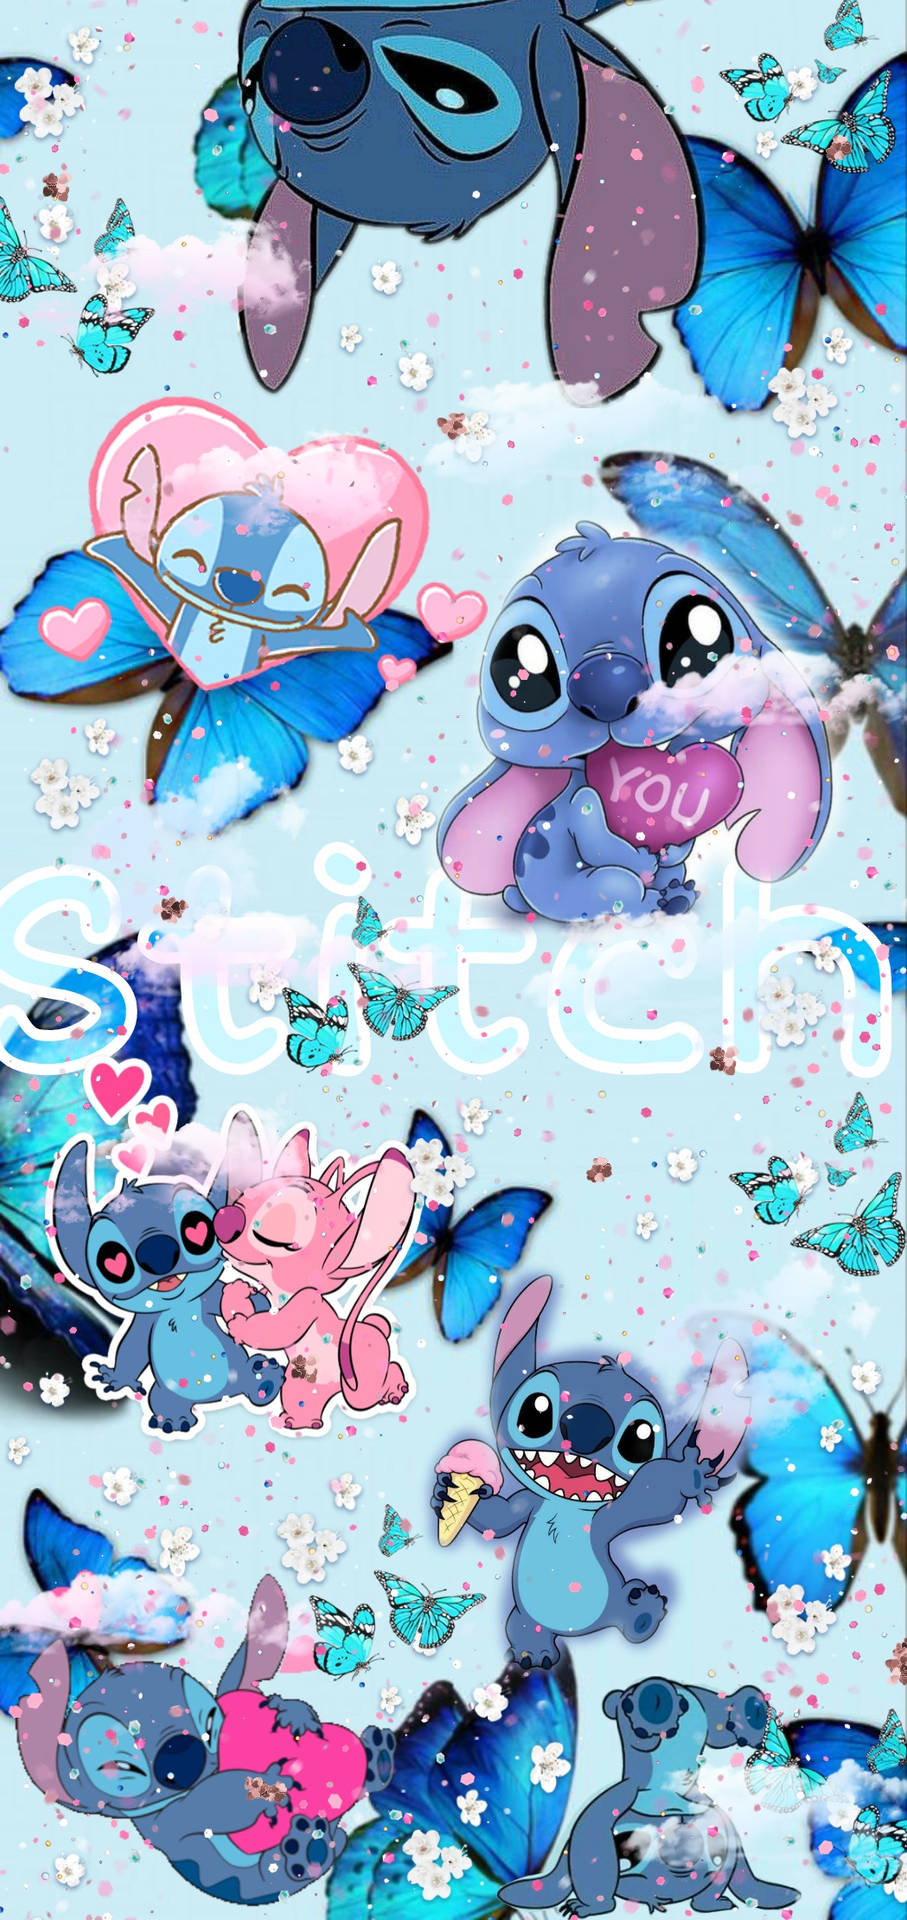 Top 999+ Stitch Collage Wallpaper Full HD, 4K Free to Use